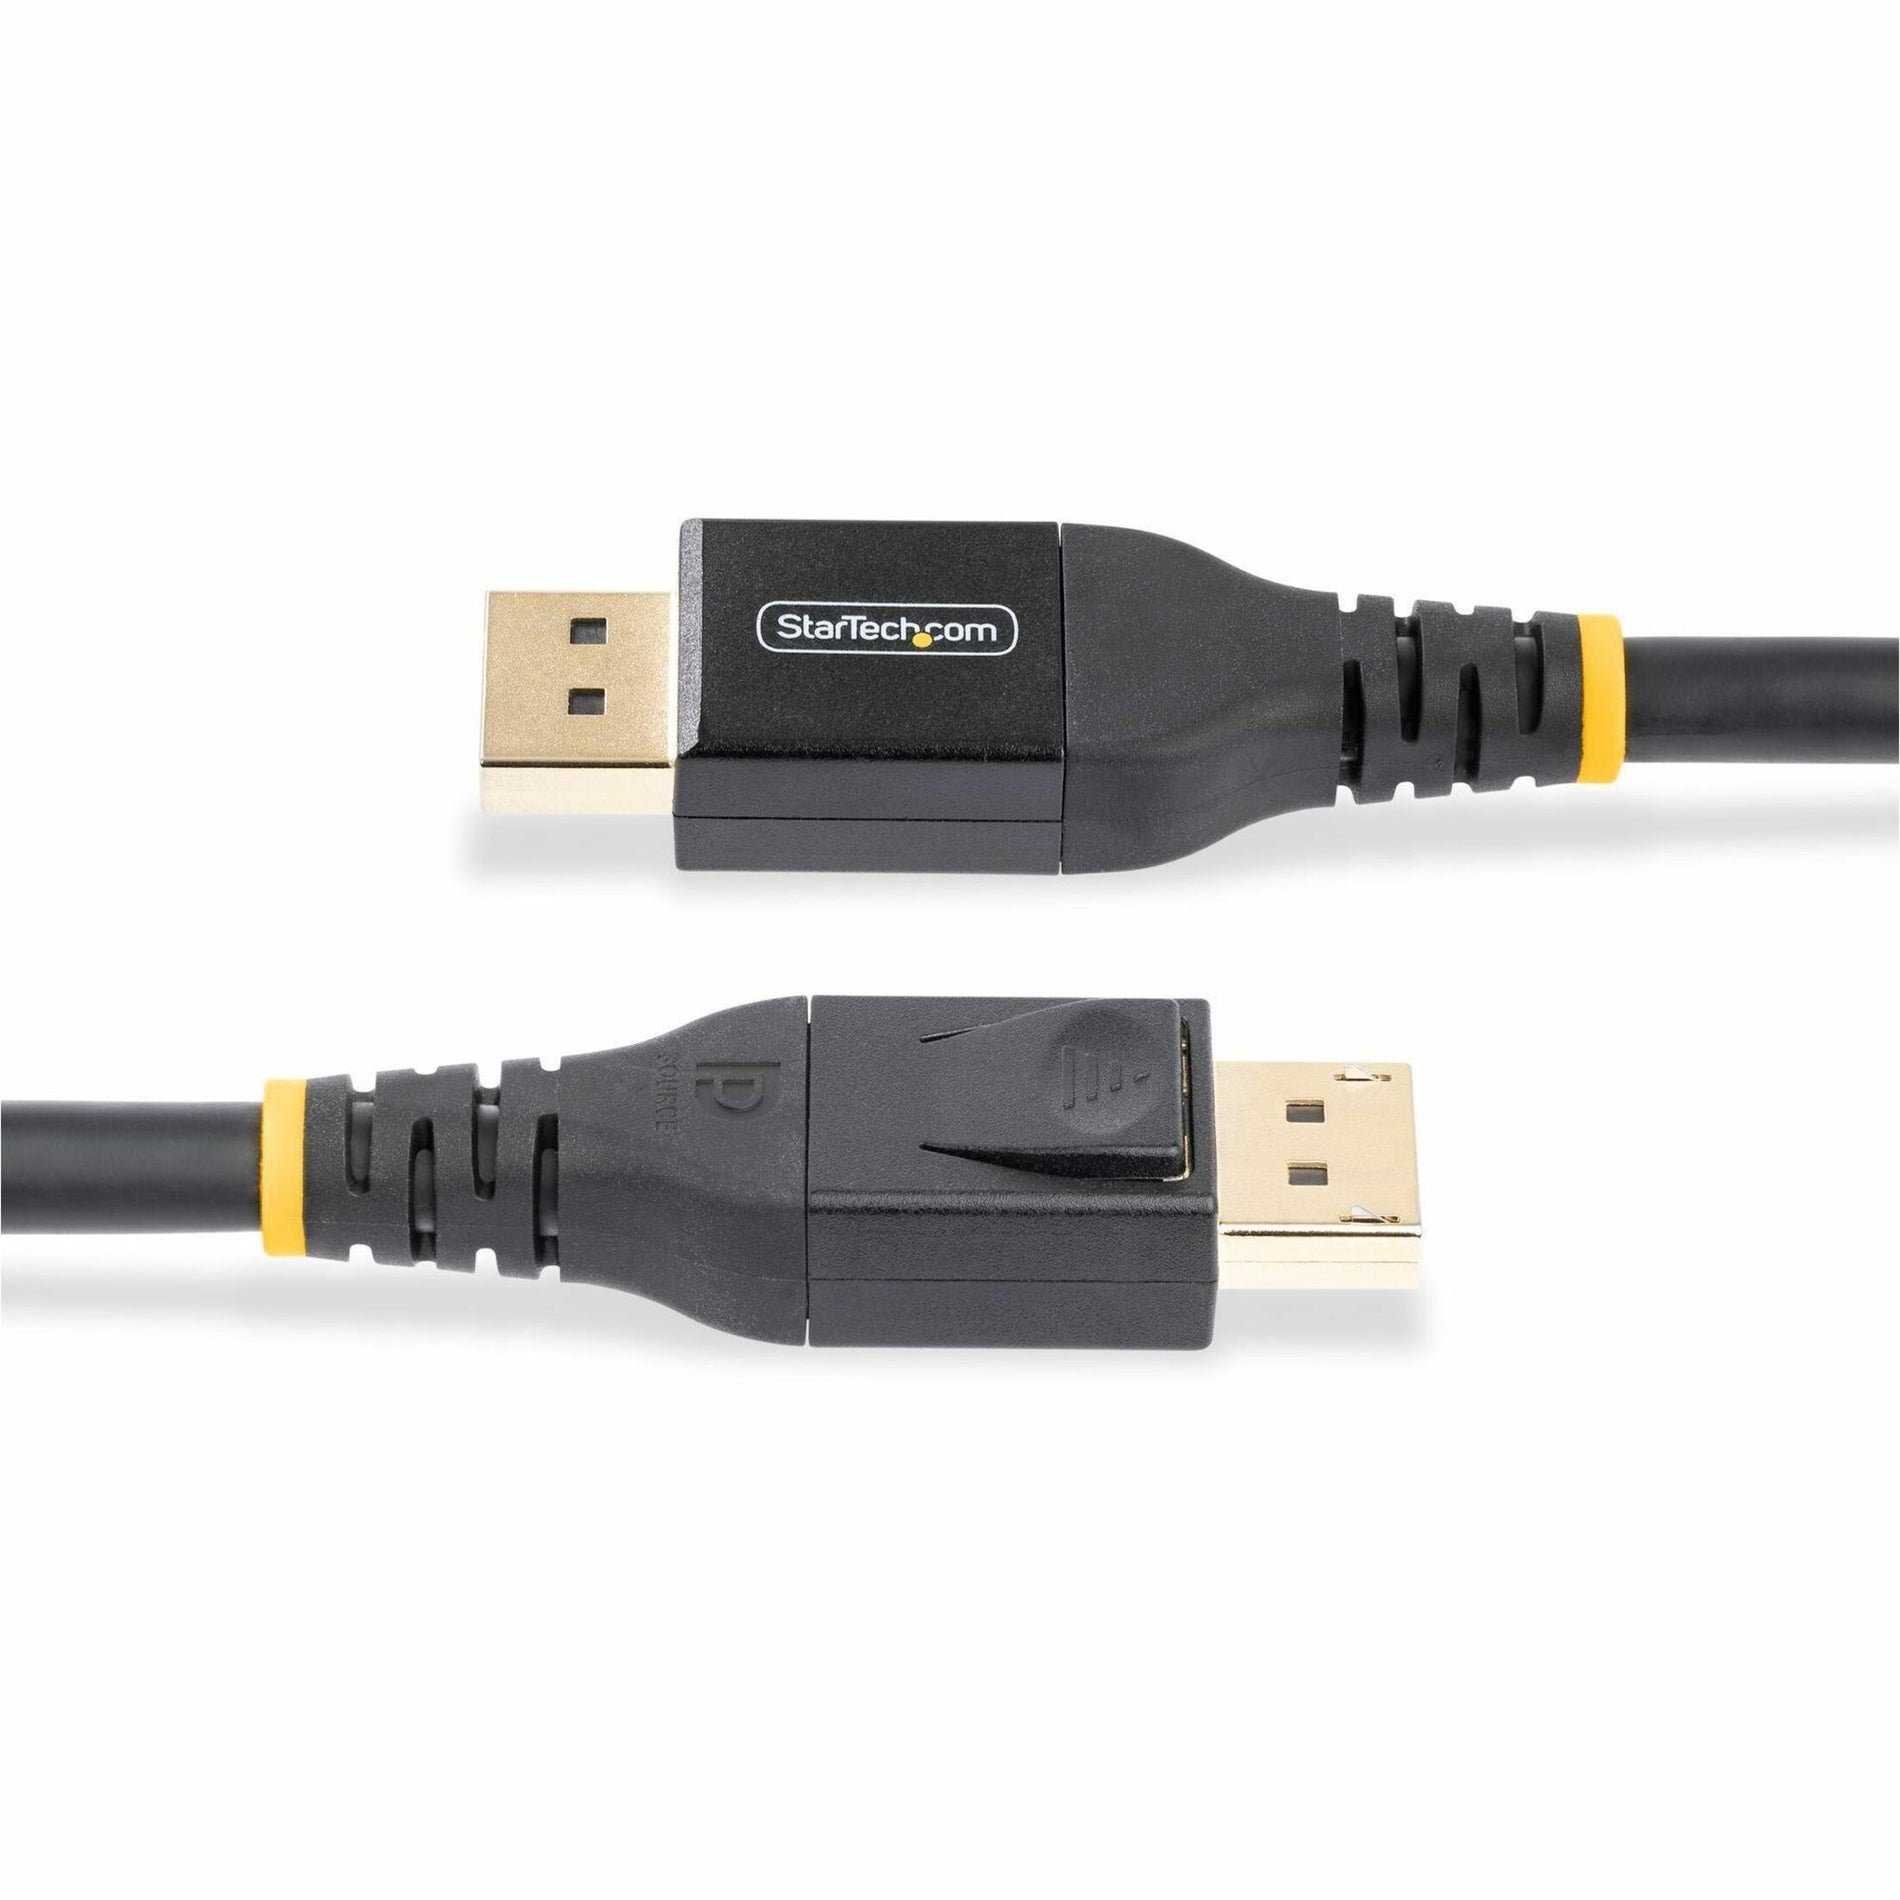 StarTech.com DP14A-15M-DP-CABLE DisplayPort Audio/Video Cable, 50 ft, Bendable, HDR10 Support, 25.9 Gbit/s Data Transfer Rate